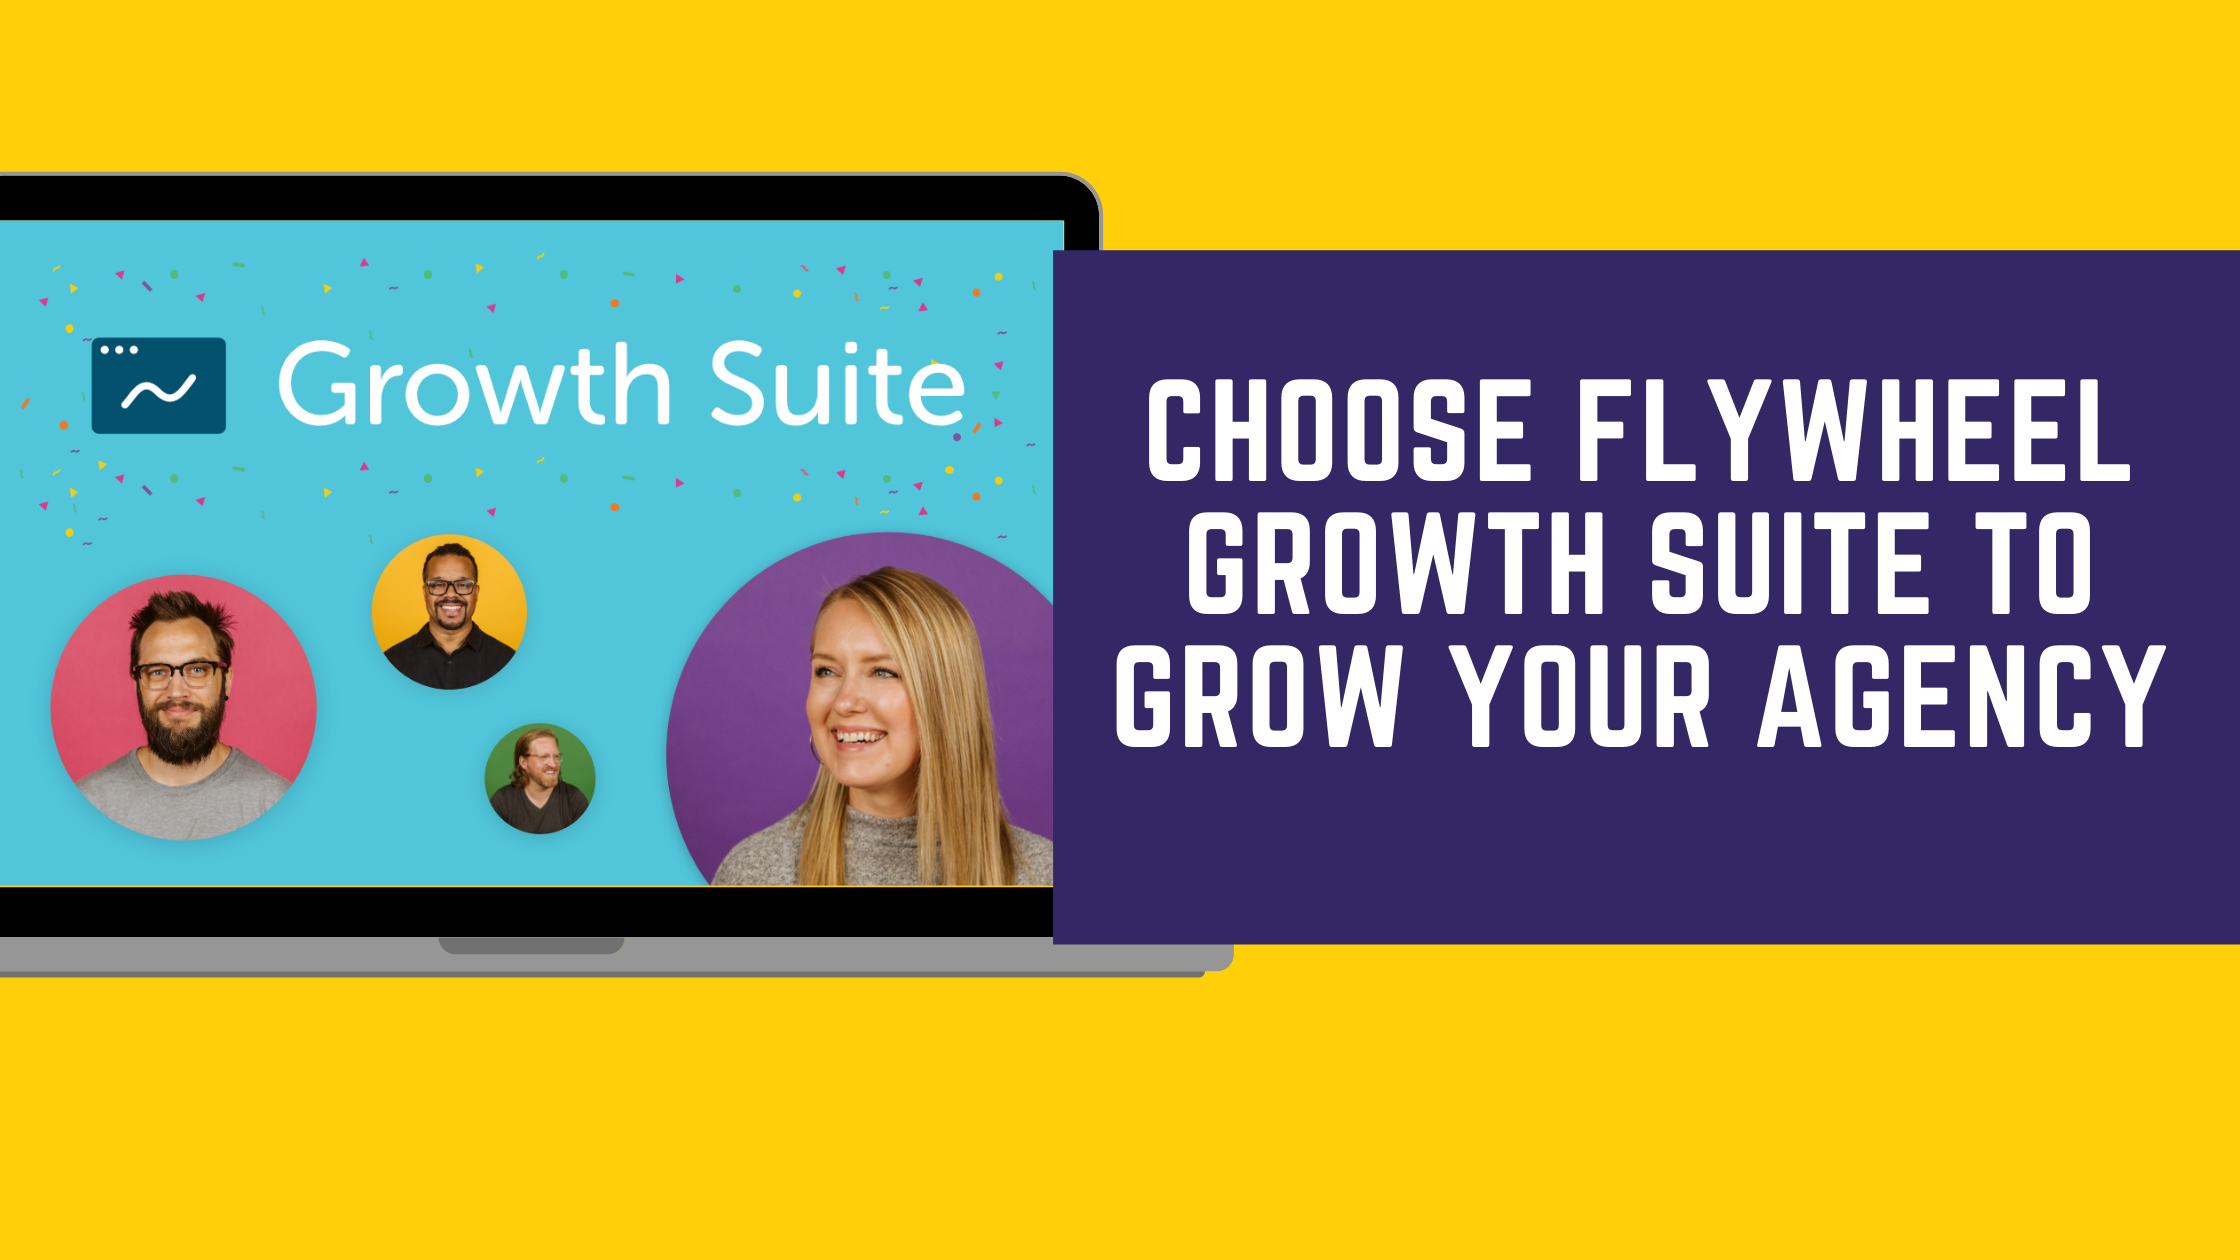 10 Reasons To Choose Flywheel Growth Suite-All In One Platform To Grow Your Agency